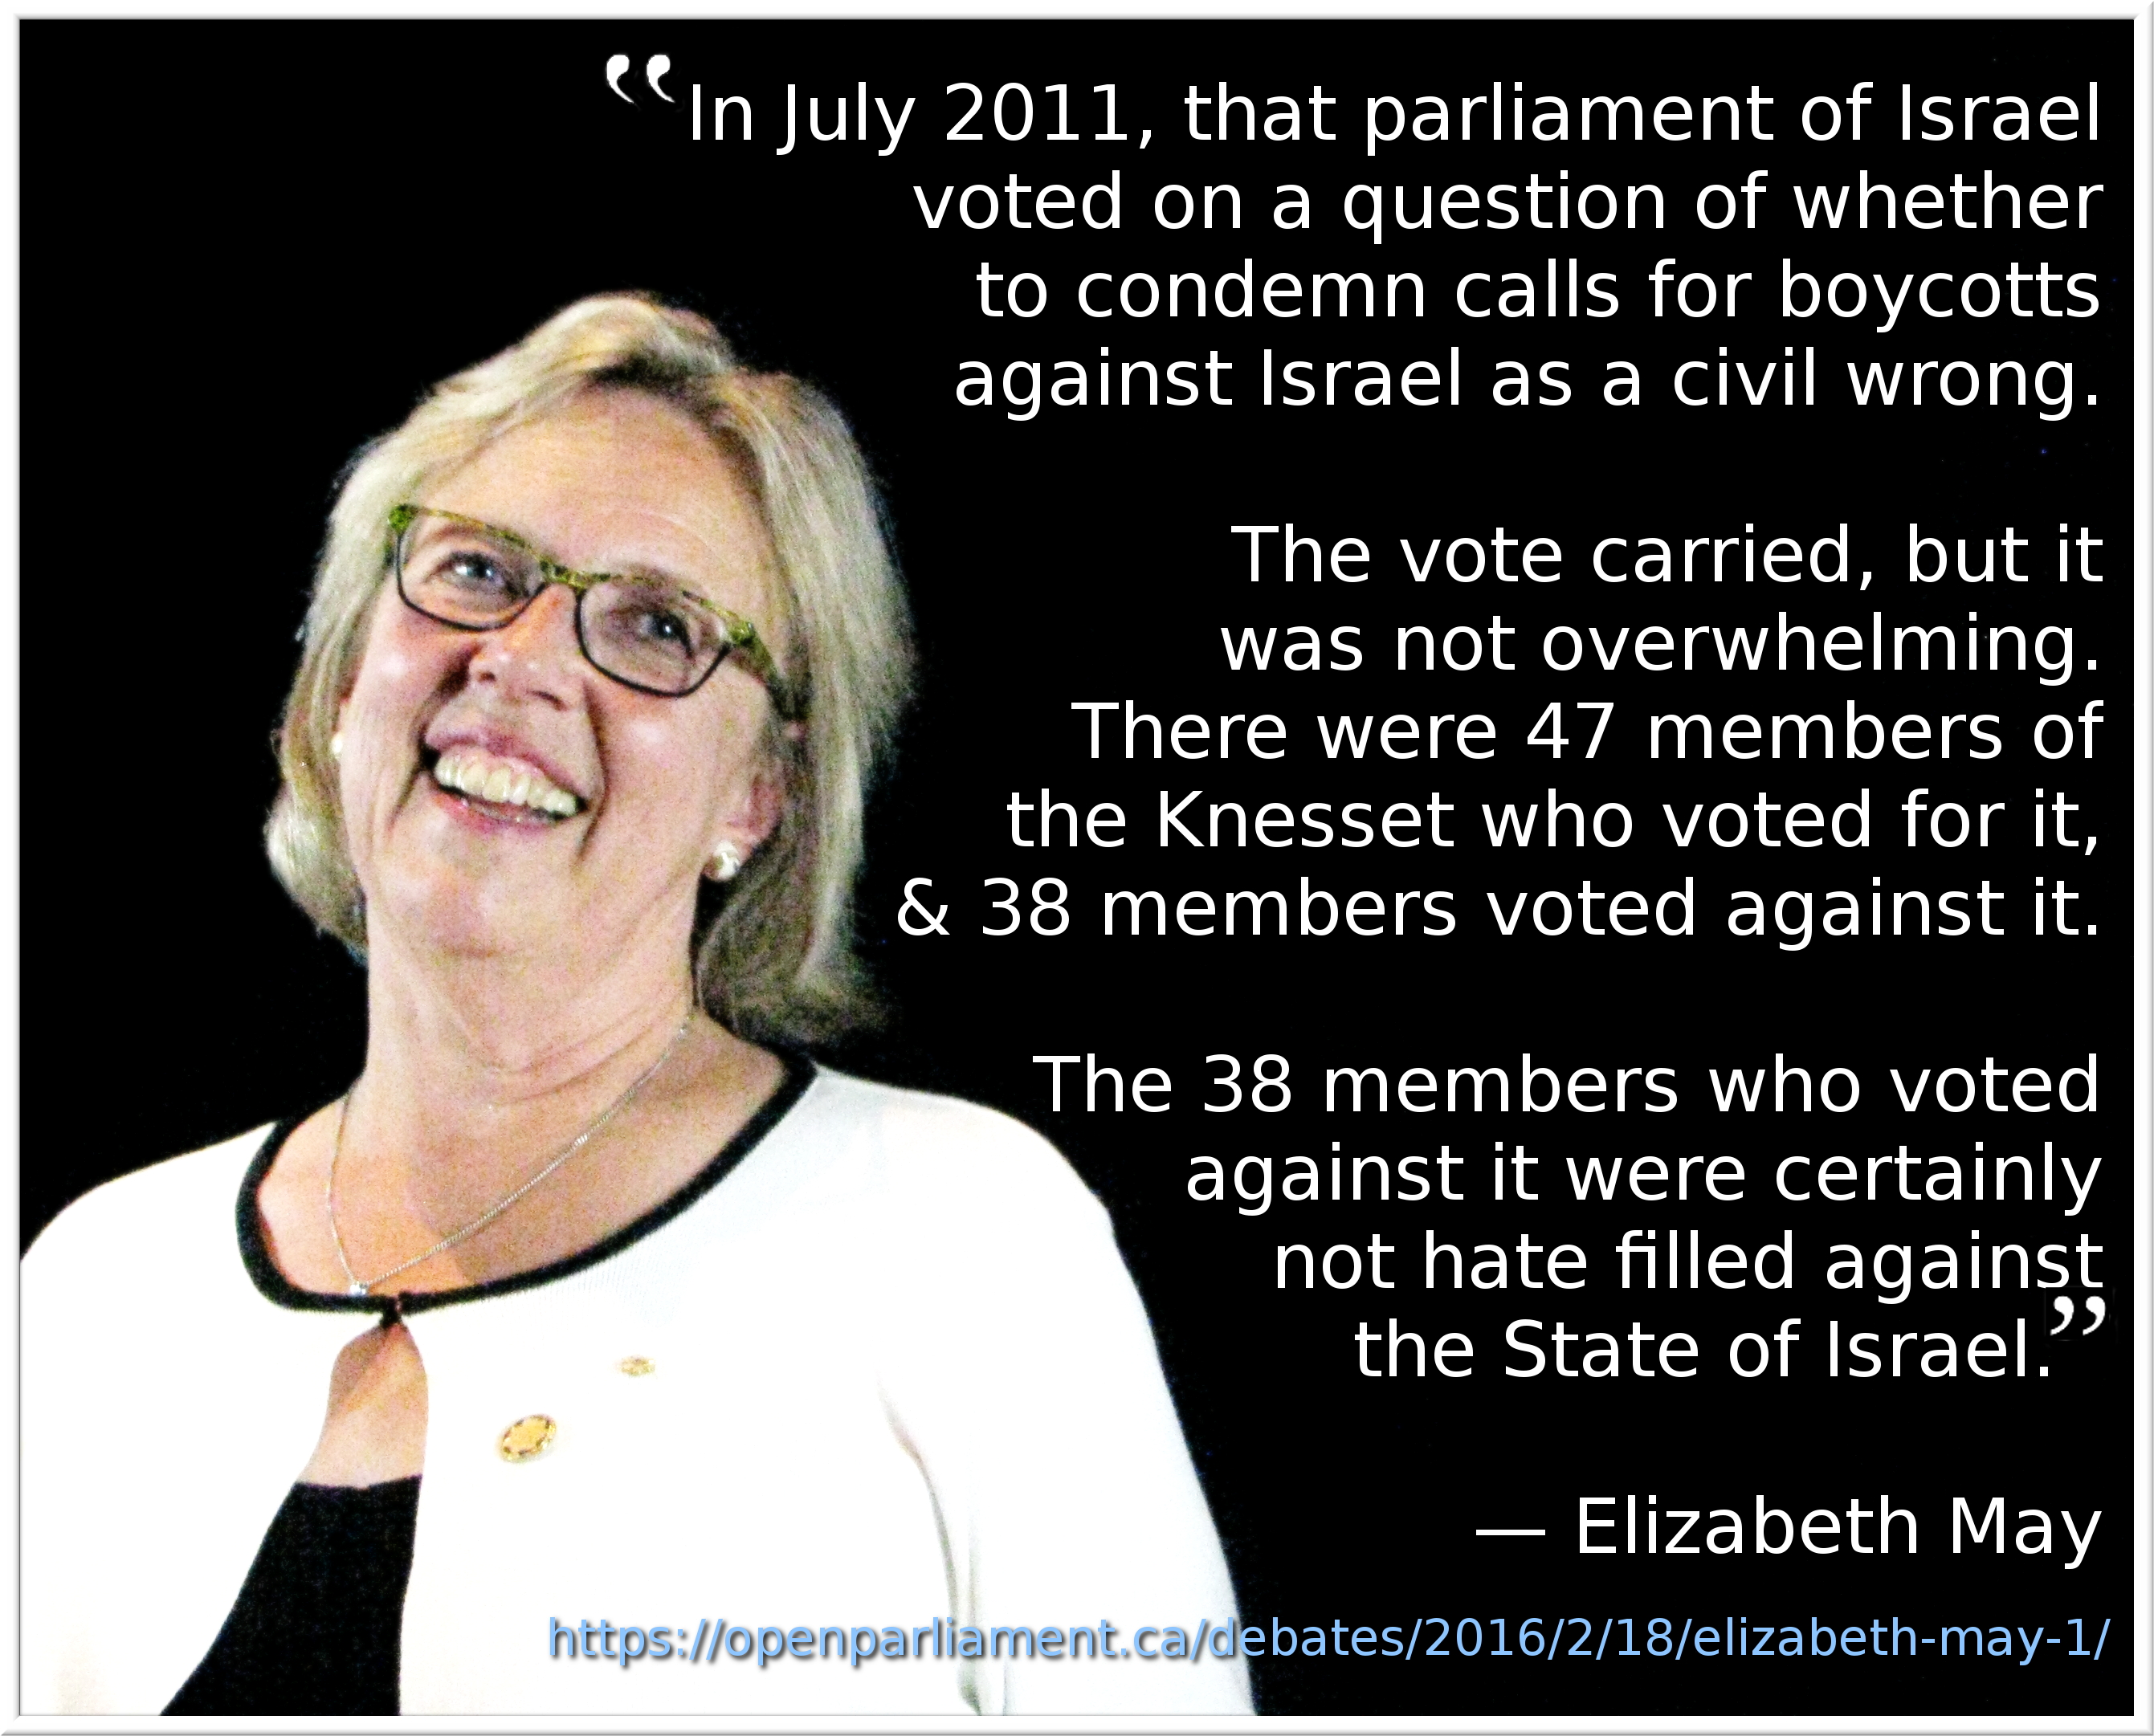 “In July 2011, that parliament of Israel voted on a question of whether to condemn calls for boycotts against Israel as a civil wrong. The vote carried, but it was not overwhelming. There were 47 members of the Knesset who voted for it, and 38 members voted against it. The 38 members who voted against it were certainly not hate filled against the State of Israel.” —Elizabeth May